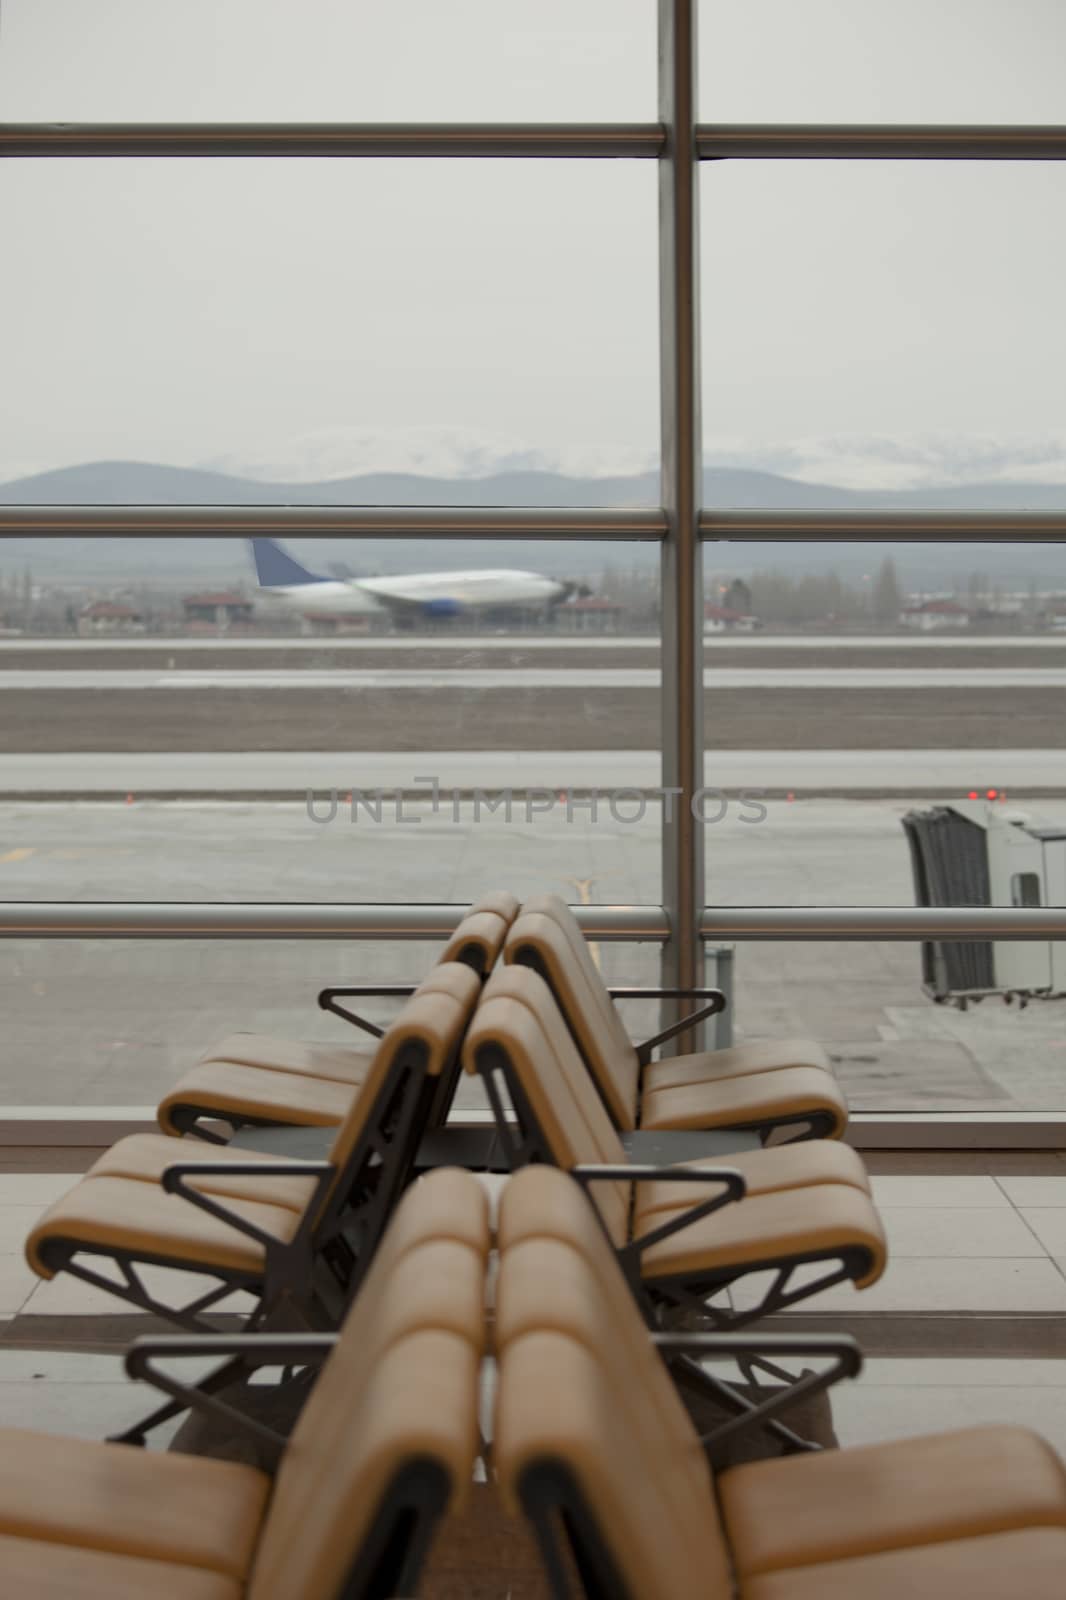 waiting room with seats in airport  by senkaya